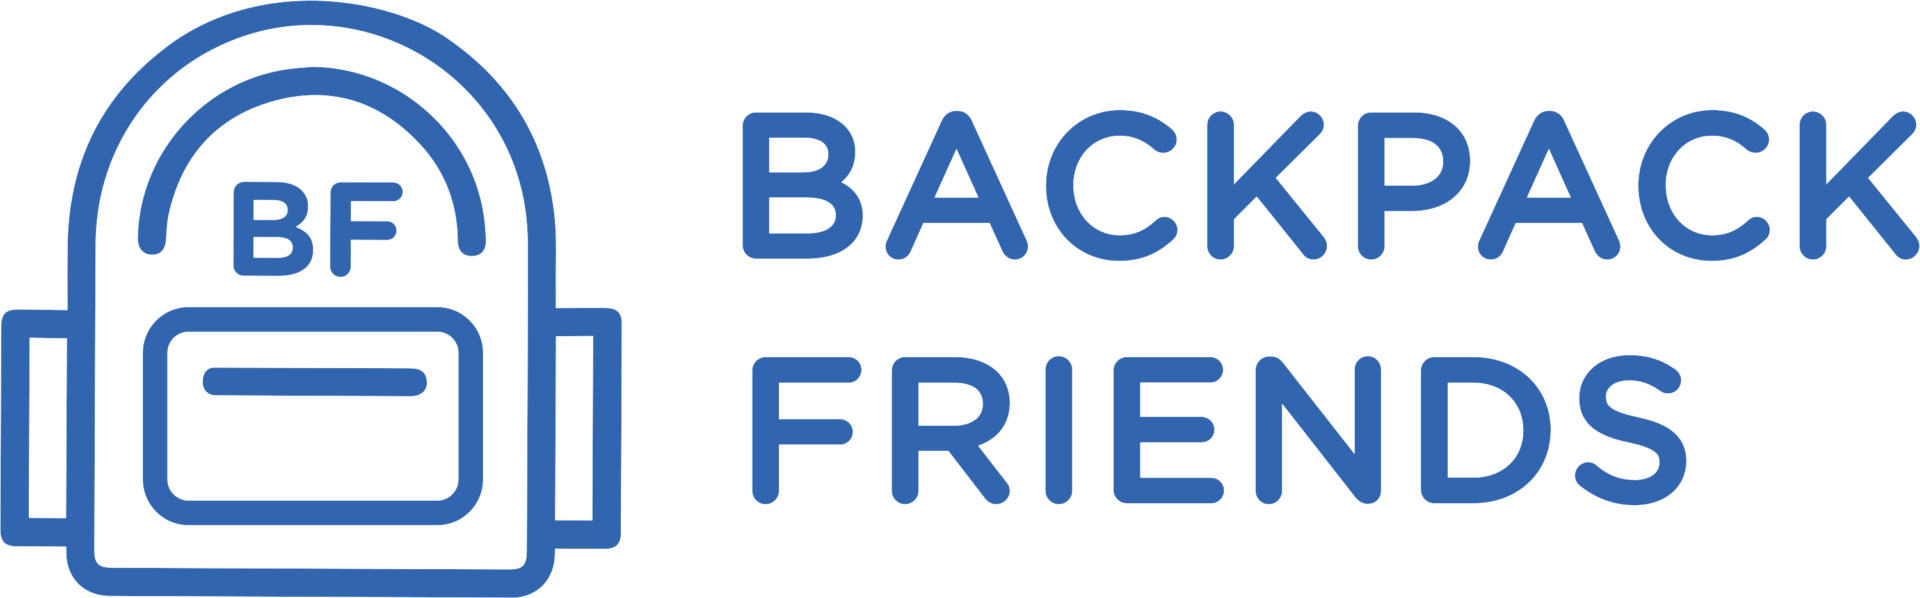 Featured Client Backpack Friends